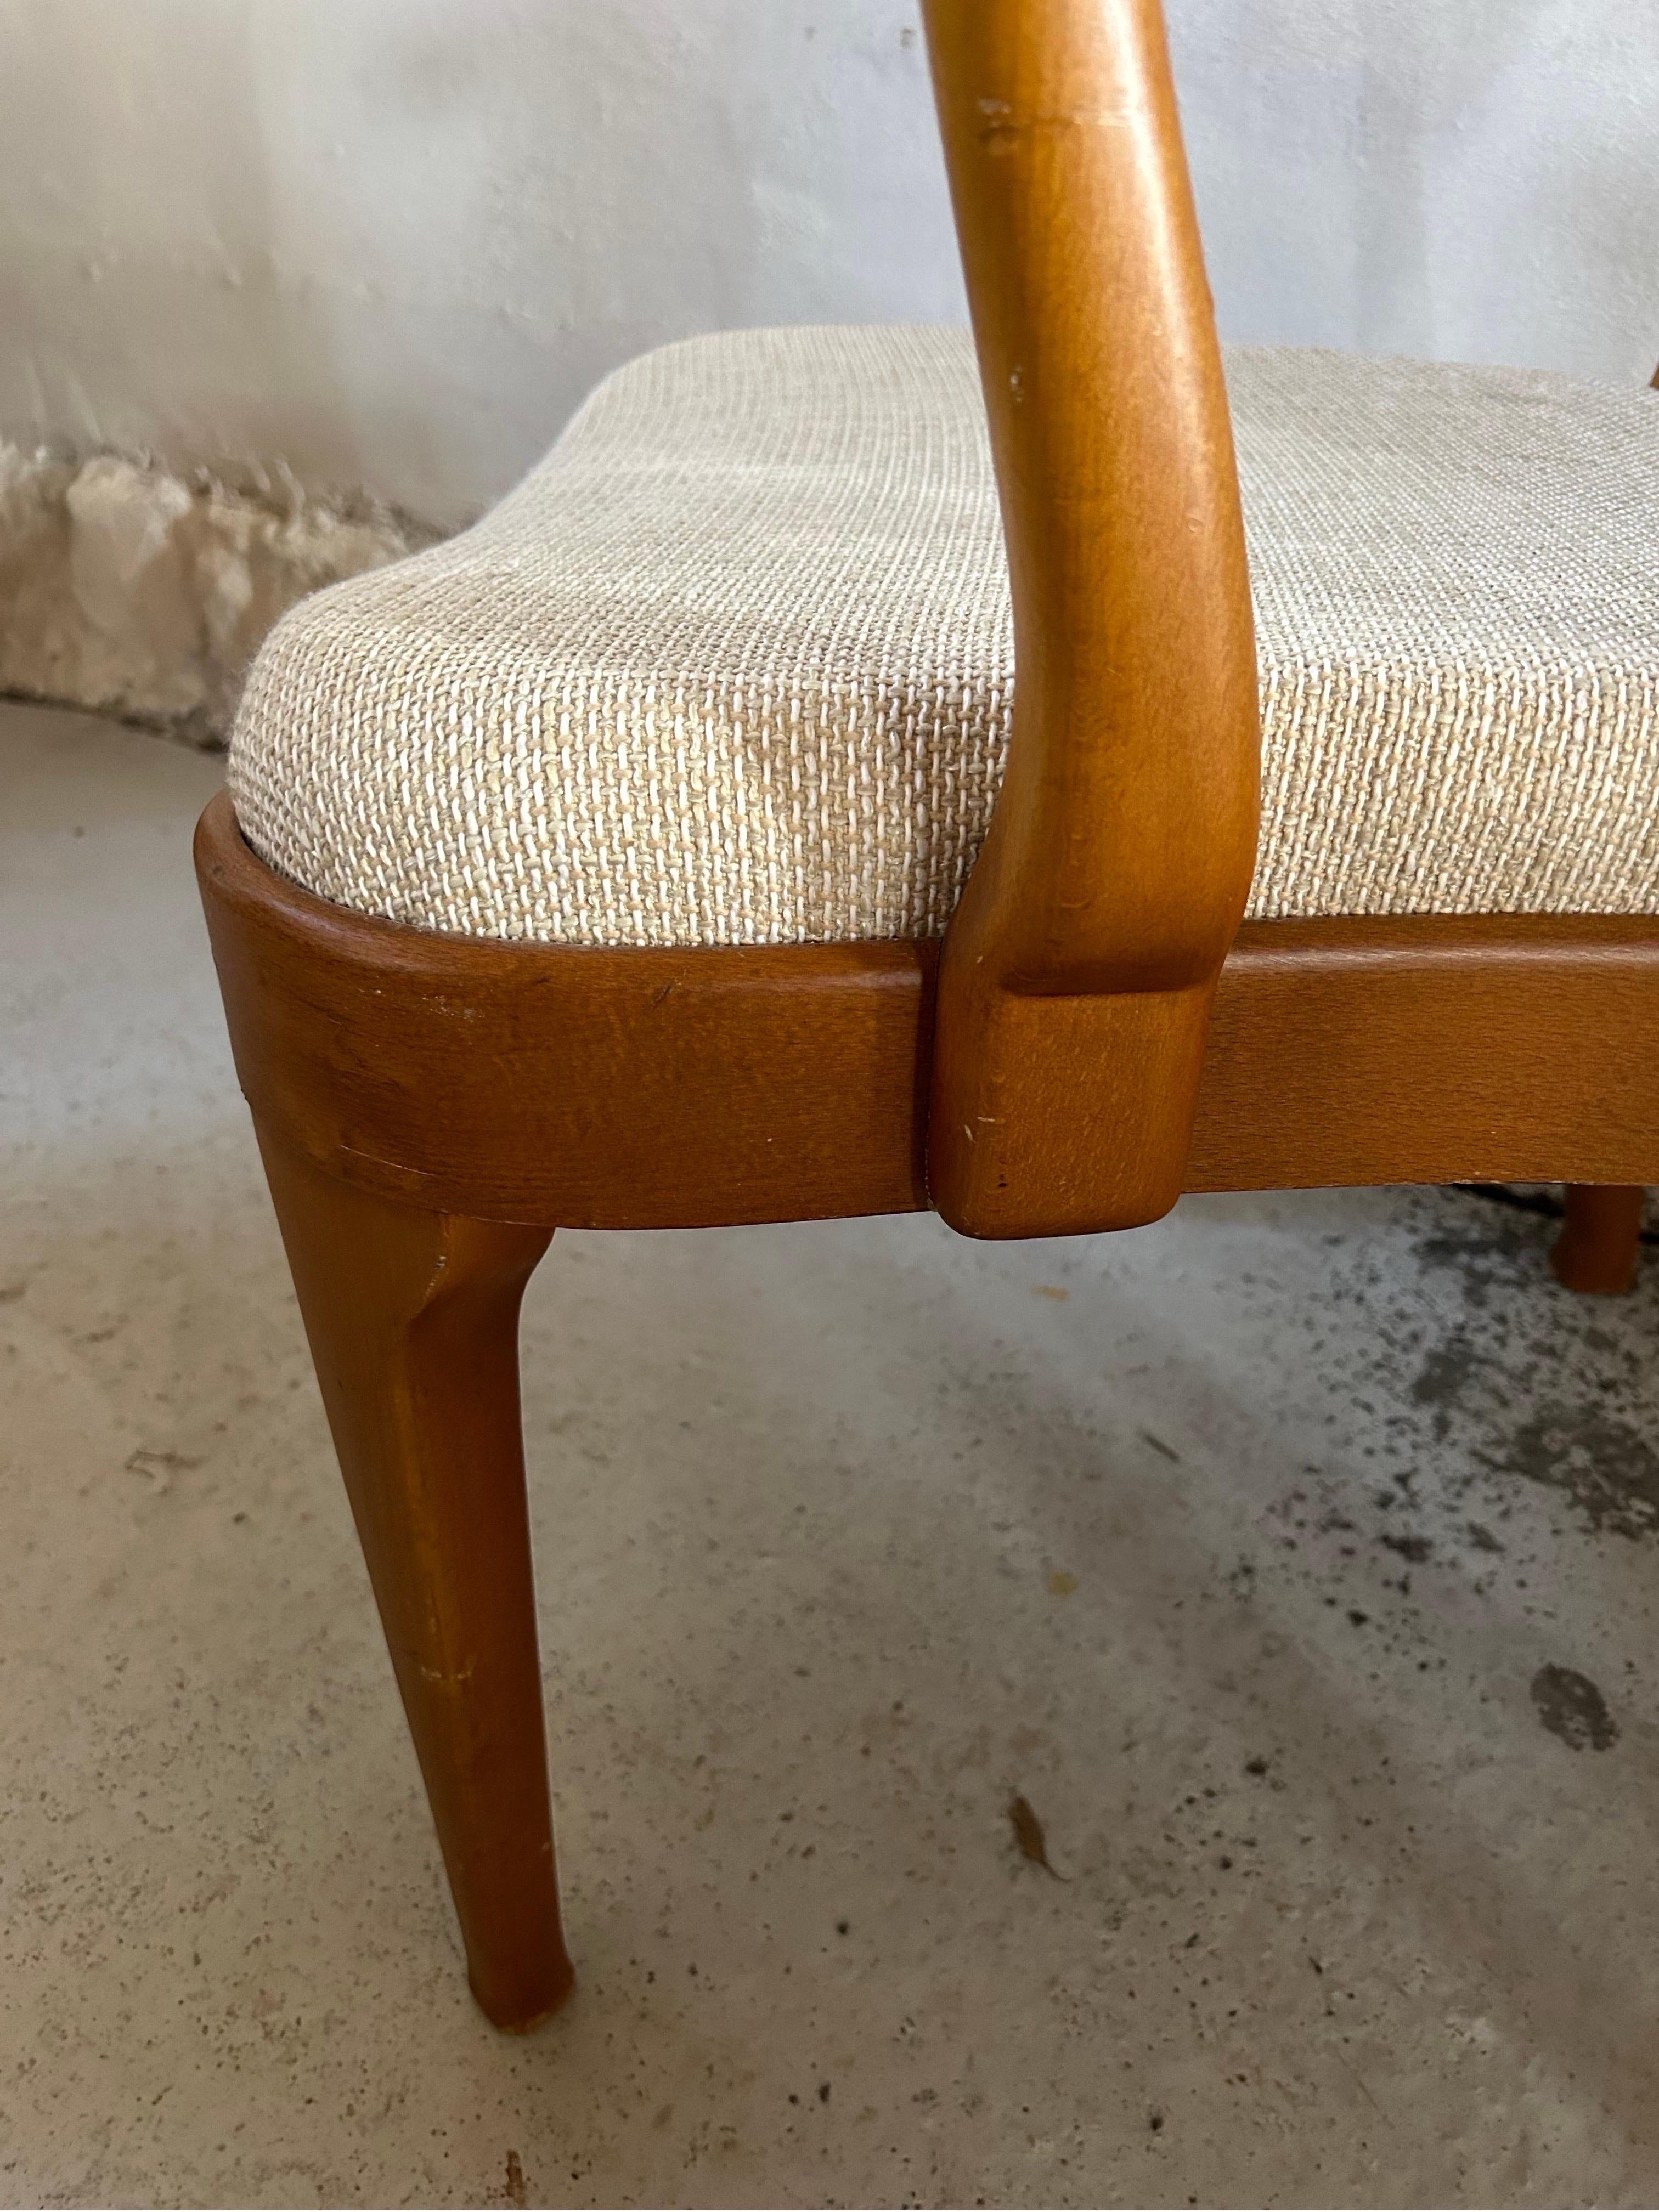 Hand-Crafted Pair of Arts and Crafts Armchairs by Thorvald Jørgensen for Fritz Hansen 1910’s For Sale